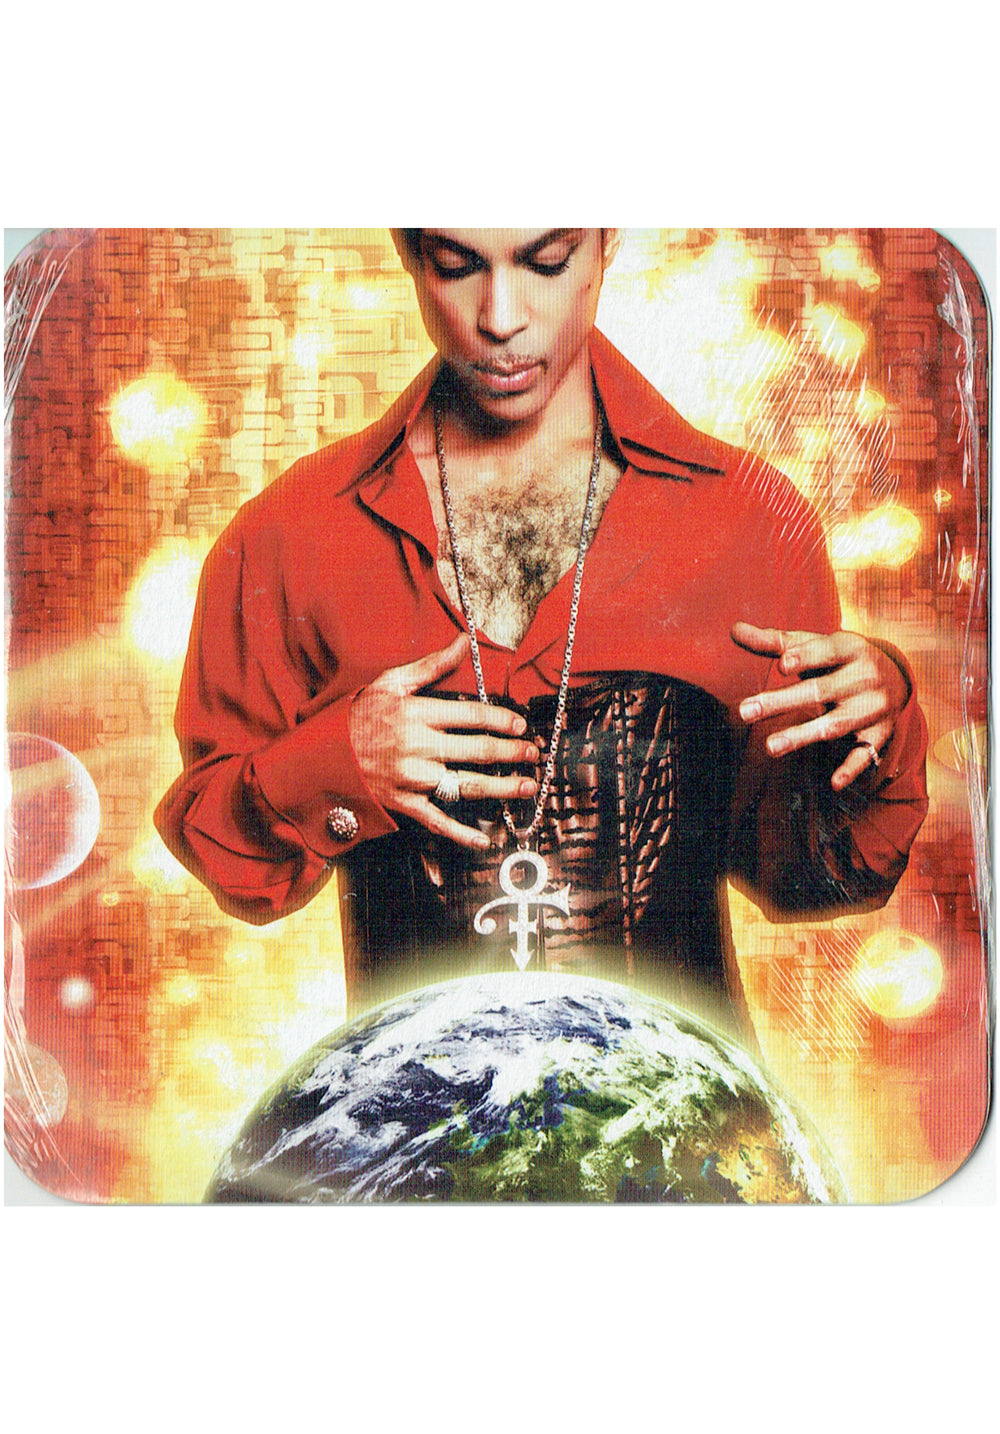 Prince – Planet Earth CD Album Round Edges 21 Nights Residency In The O2 As NEW 2007